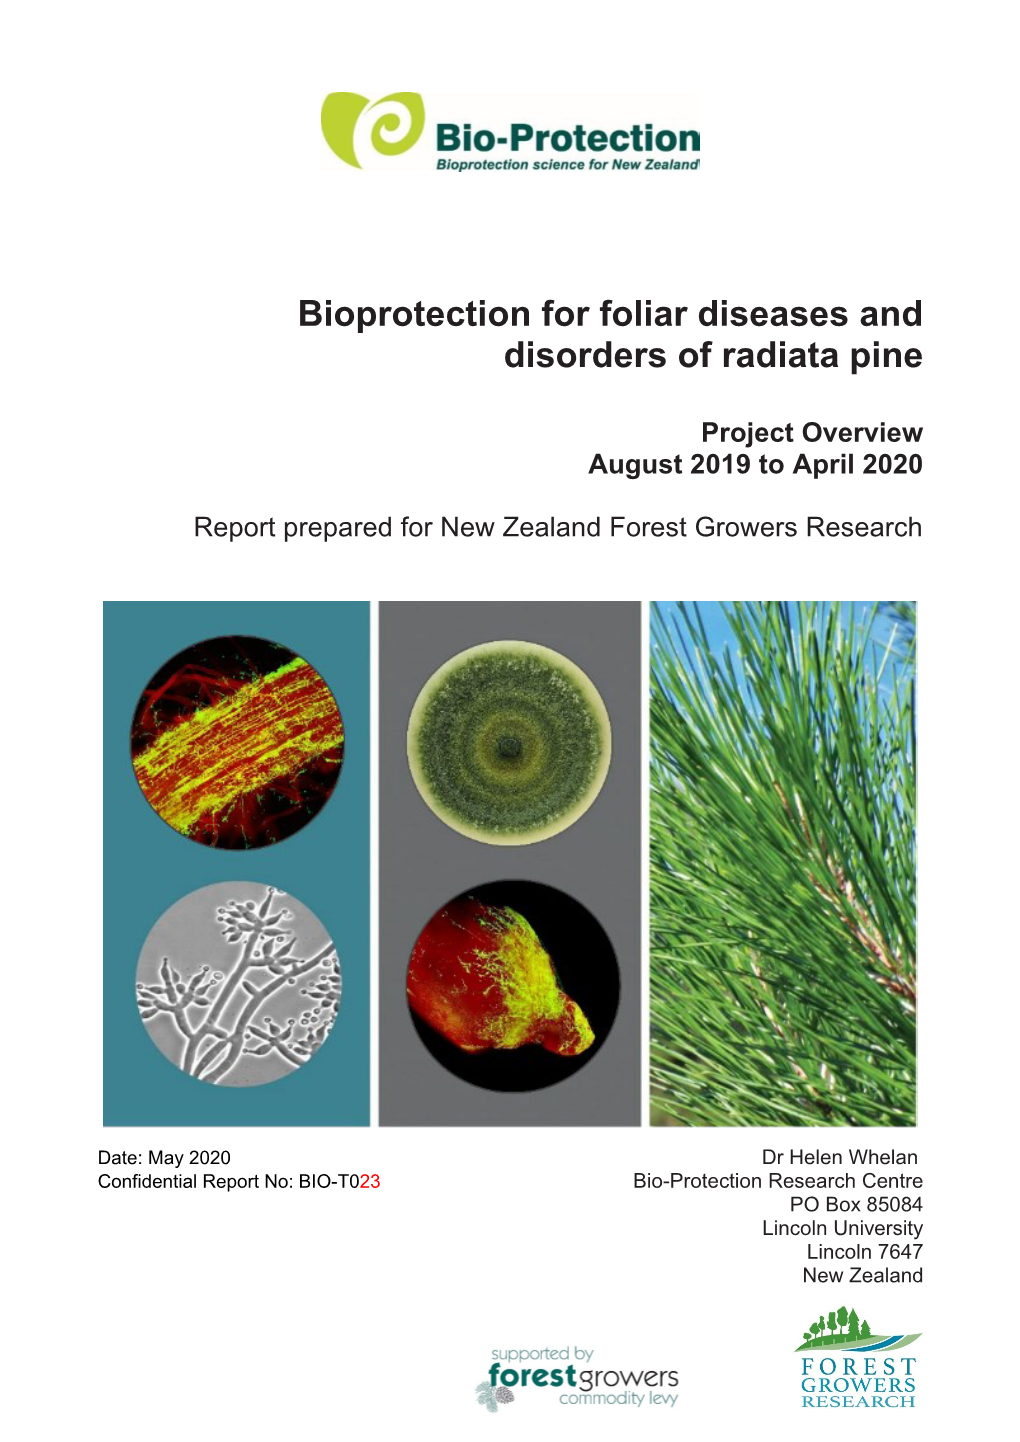 Bioprotection for Foliar Diseases and Disorders of Radiata Pine